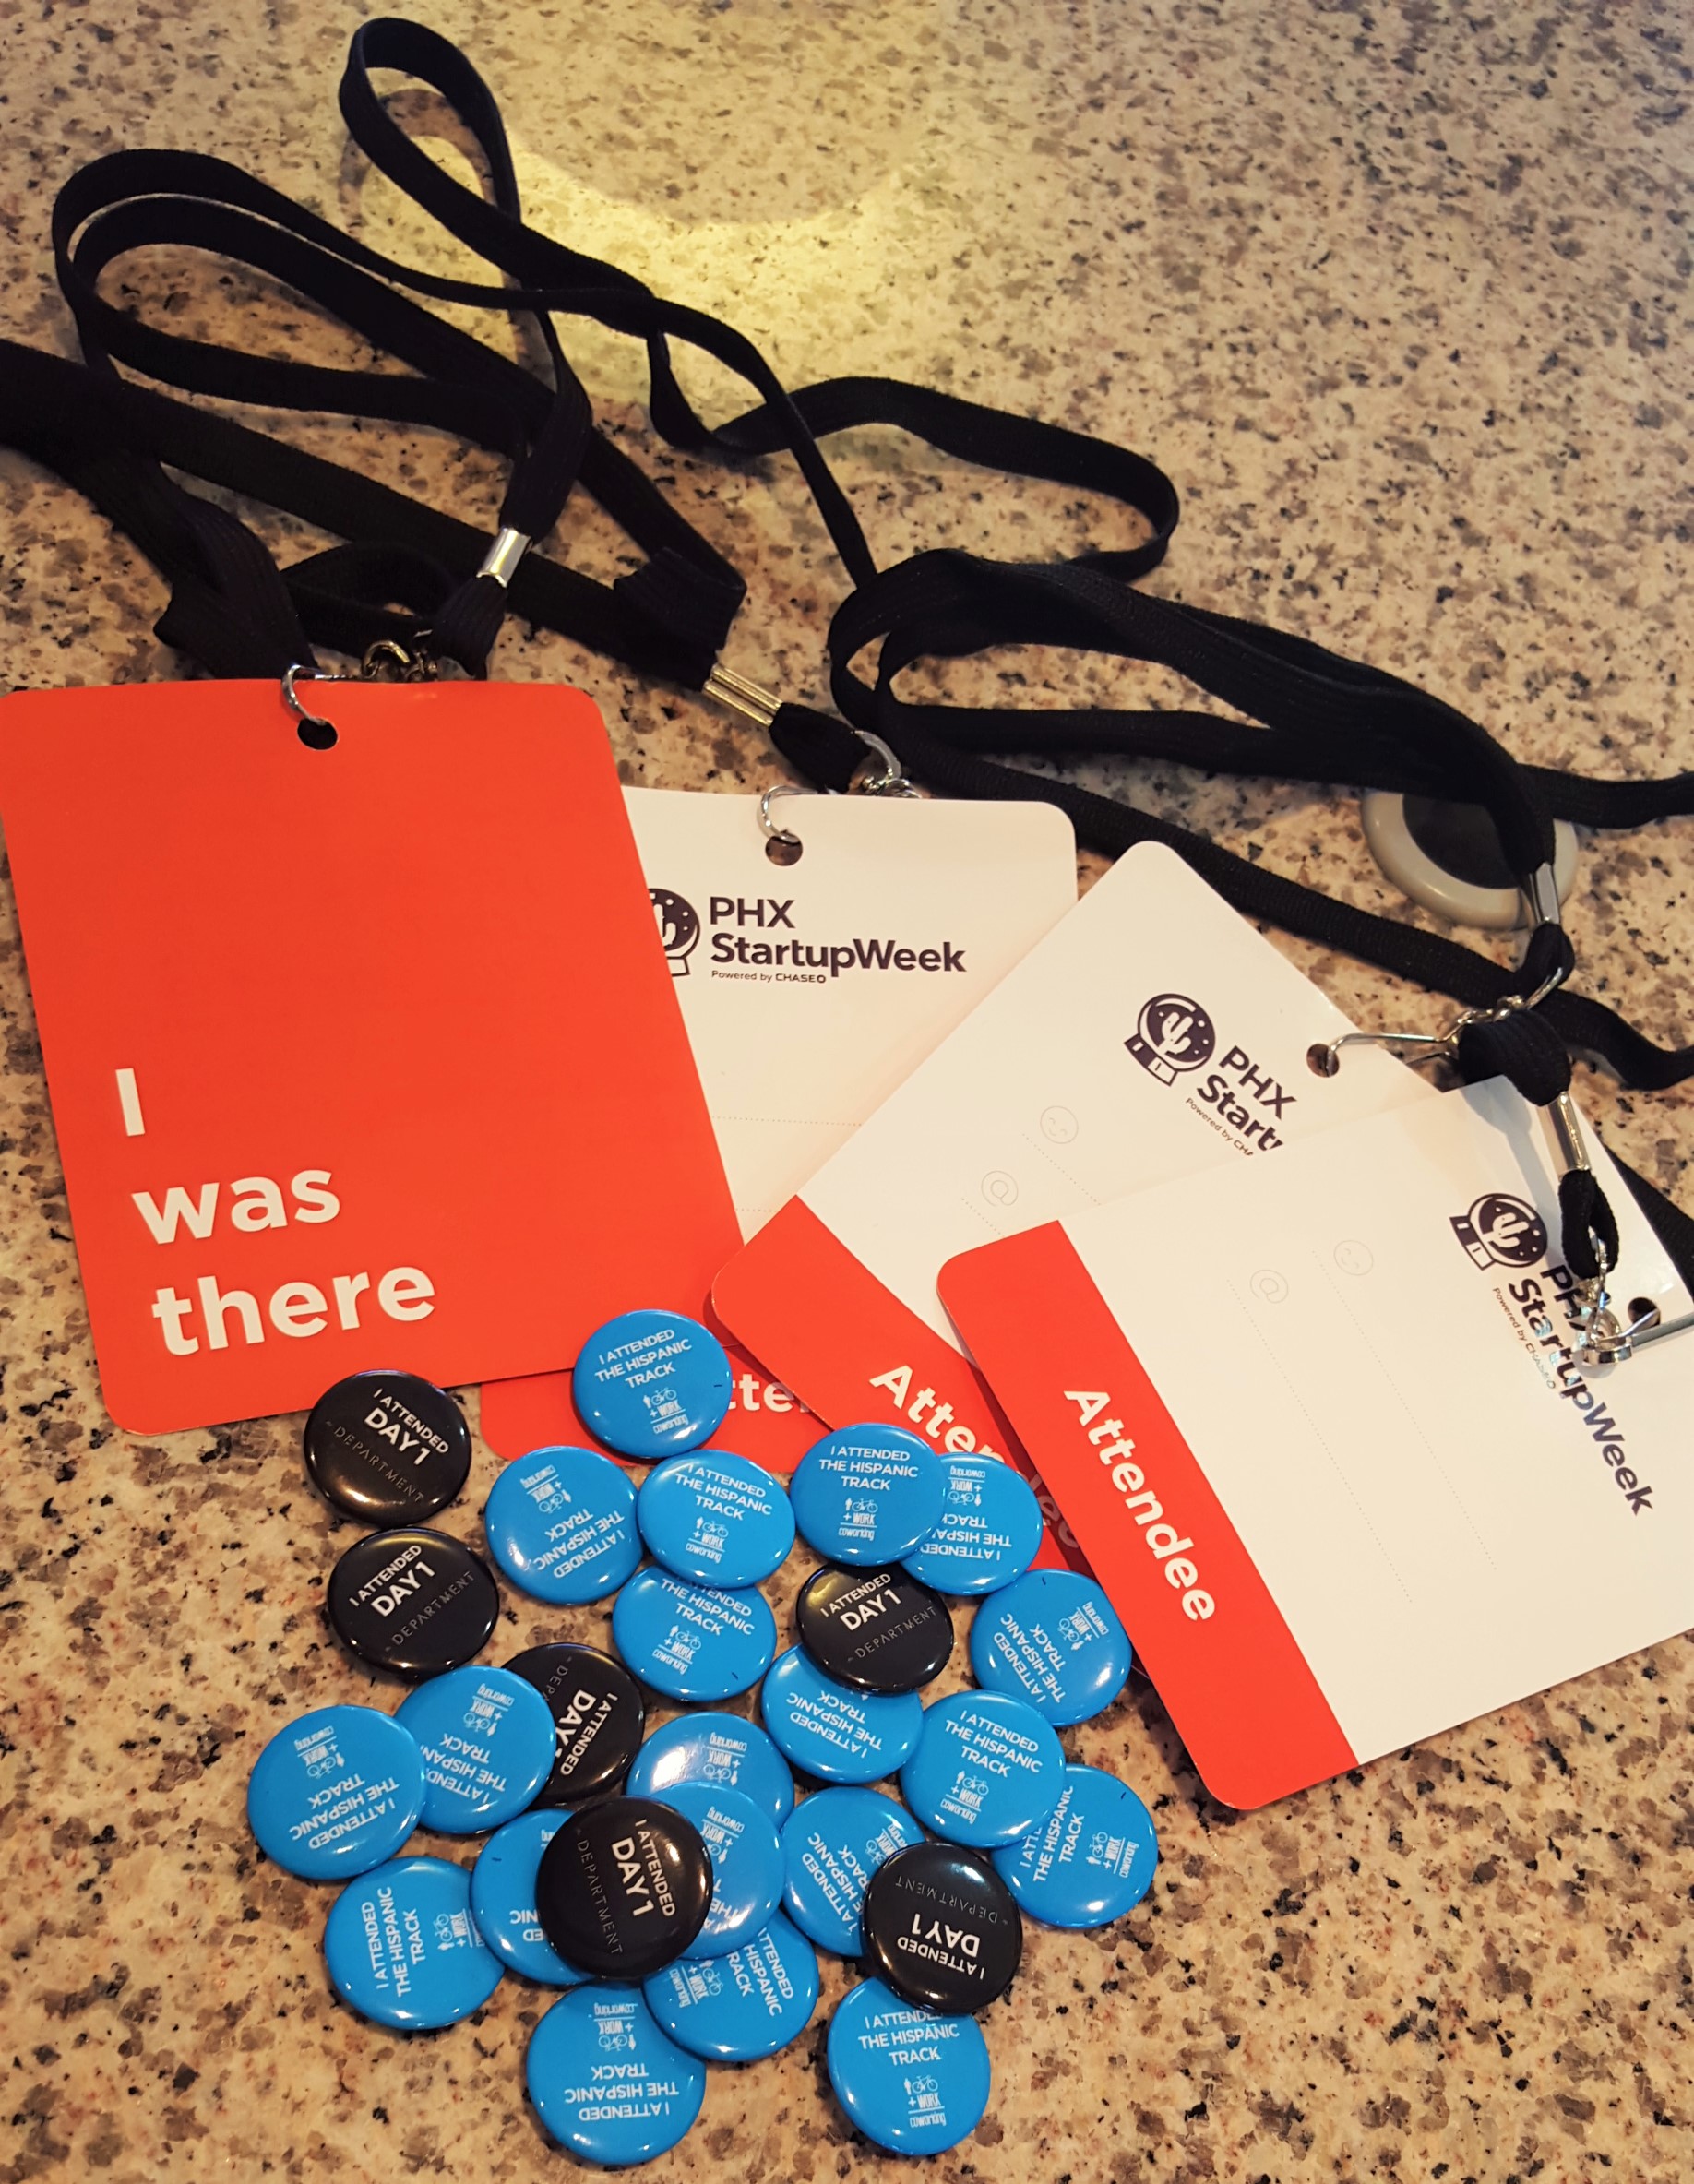 Fun buttons and lanyards form the event! 